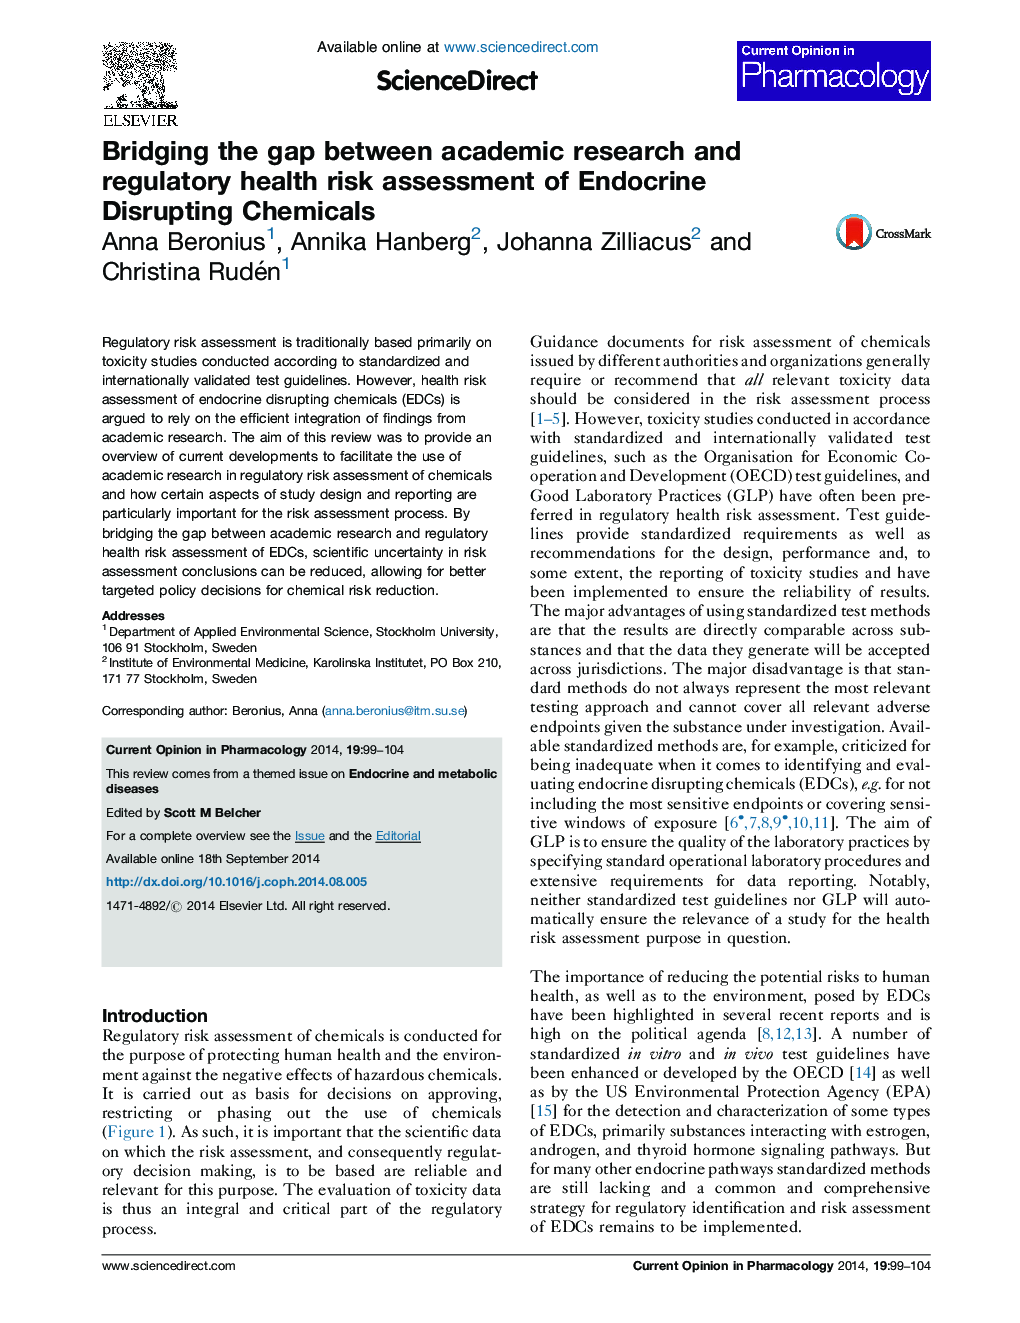 Bridging the gap between academic research and regulatory health risk assessment of Endocrine Disrupting Chemicals